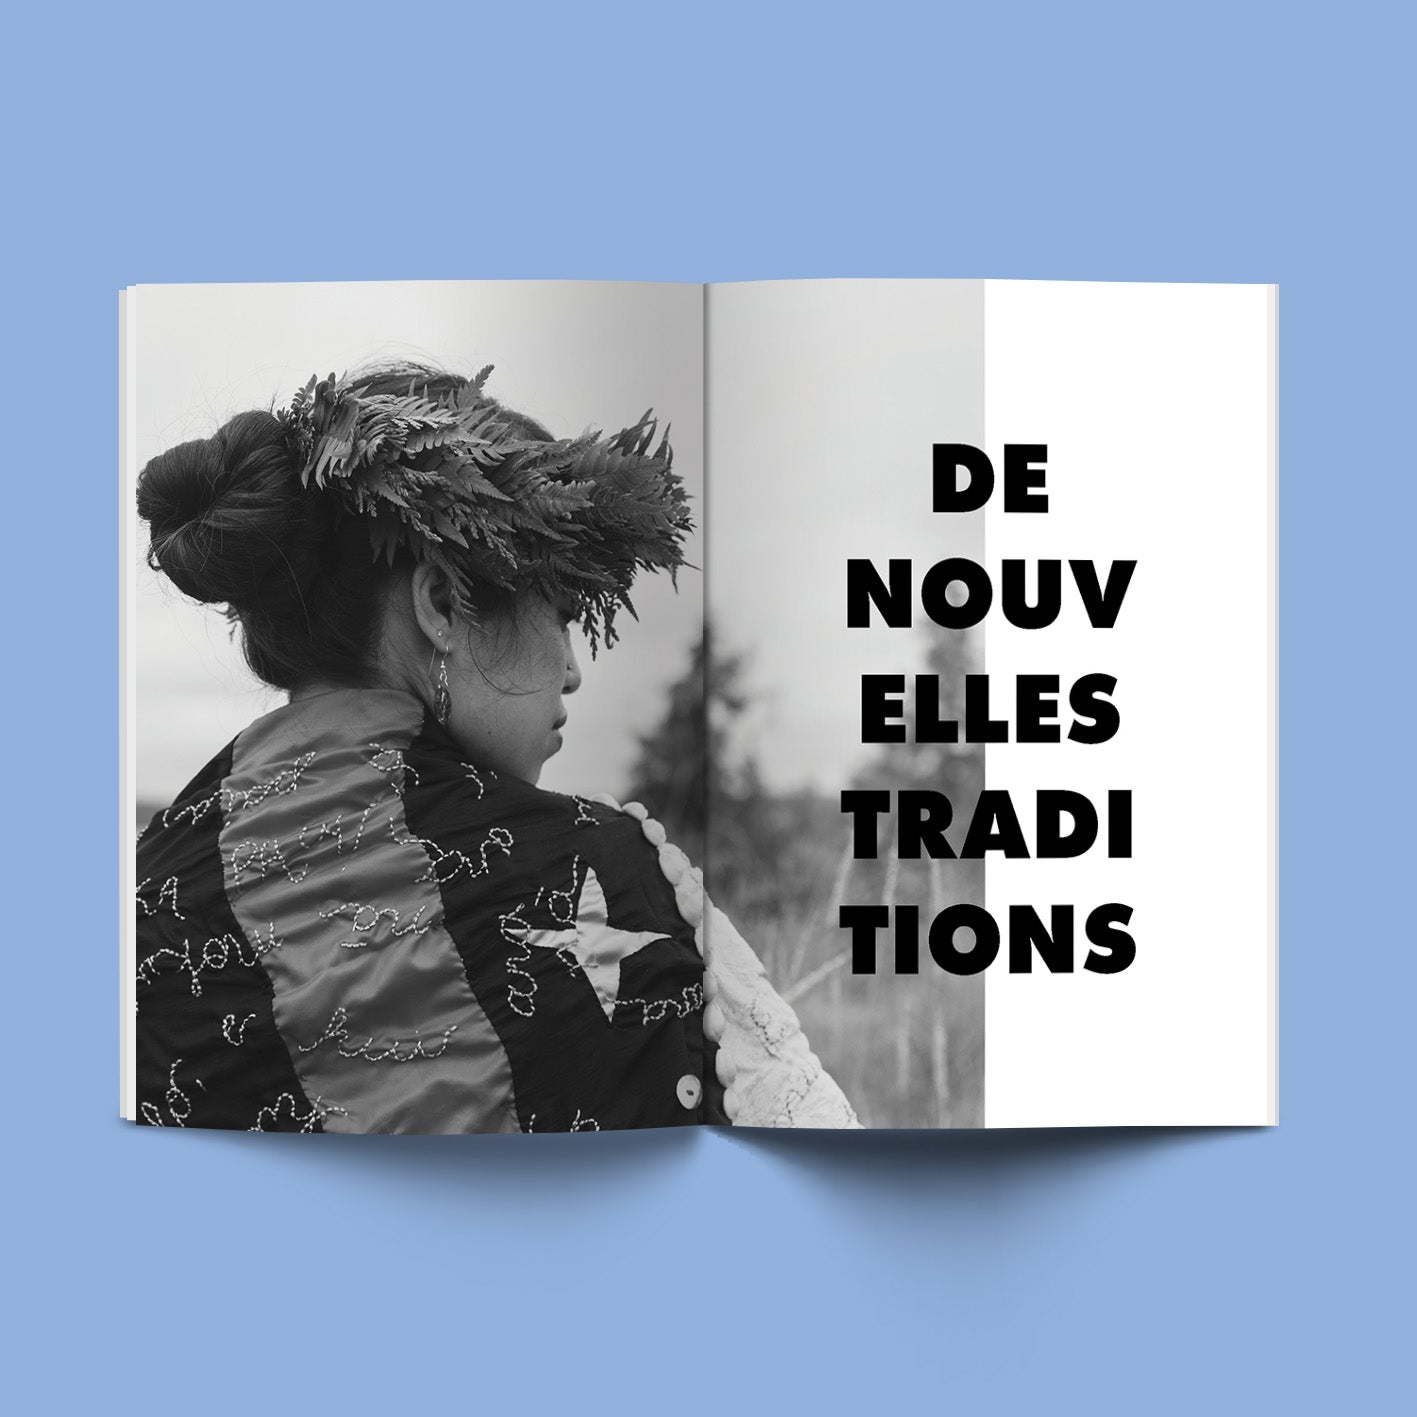 Mockup of the third issue of Convergence Magazine in French. Title page of "De nouvelle traditions" featuring Lehuauakea, Kanaka Maoli artist in a black and white portrait.